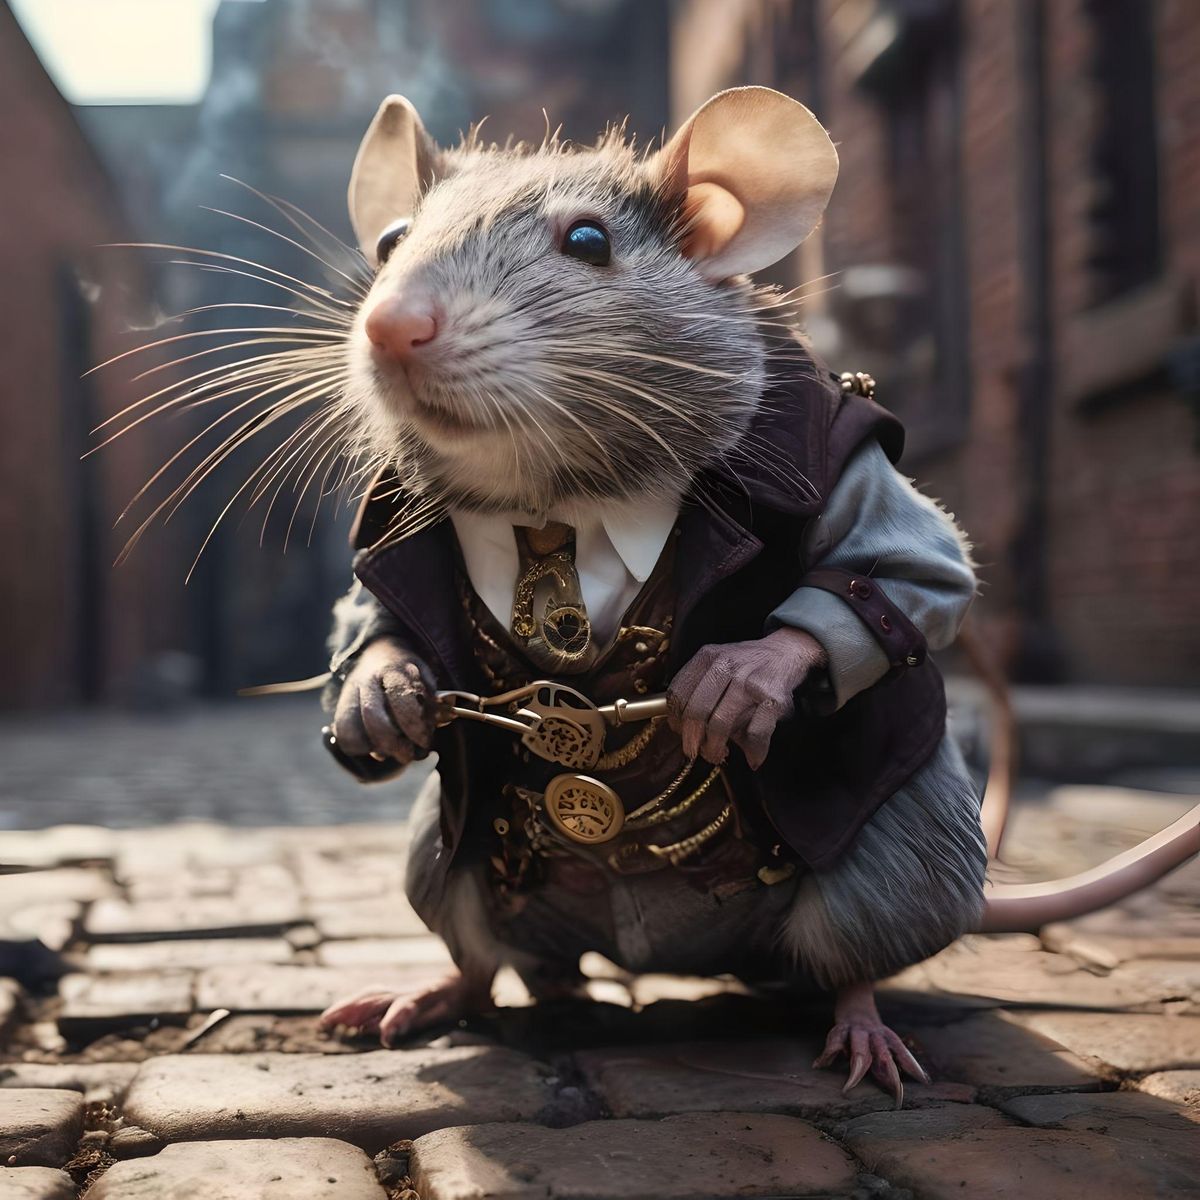 a Victorian age steampunk rat searching for food in the streets. Smoke, bricks, steampunk, gears, rich details, glass, rusty, shining metal, close-up.